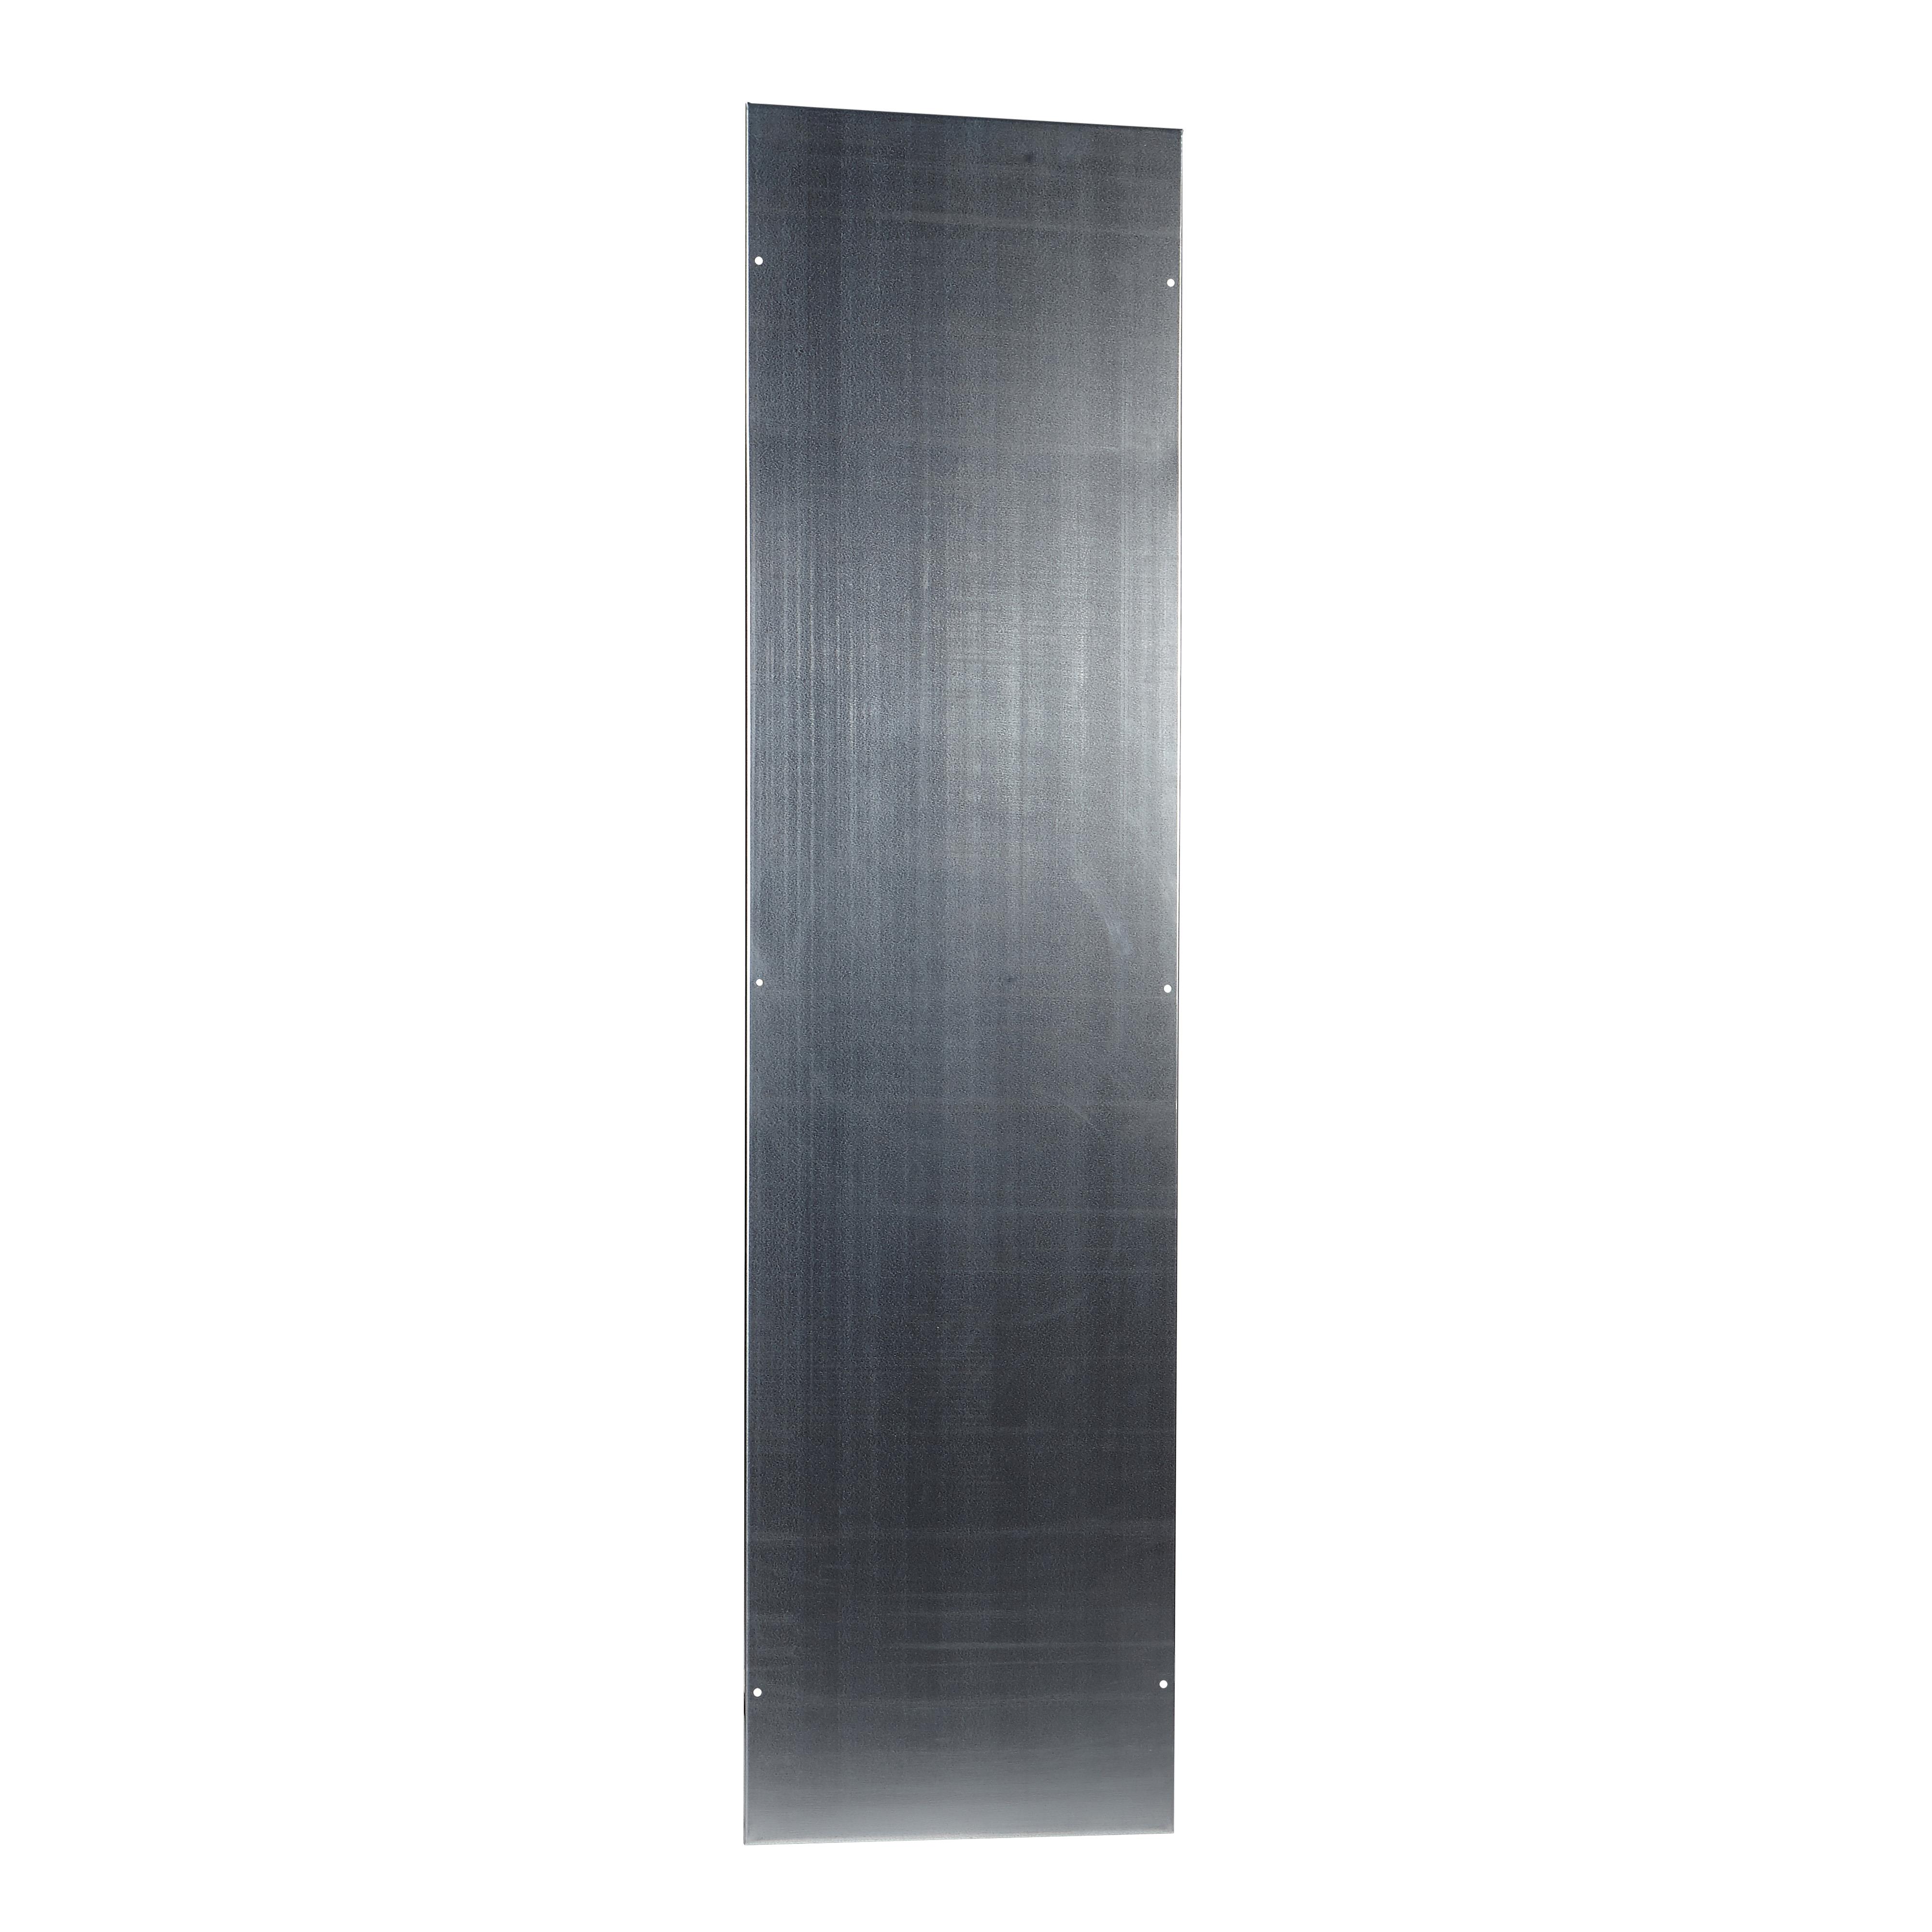 【NSYPPS166】PARTITION PANEL SF 1600X600